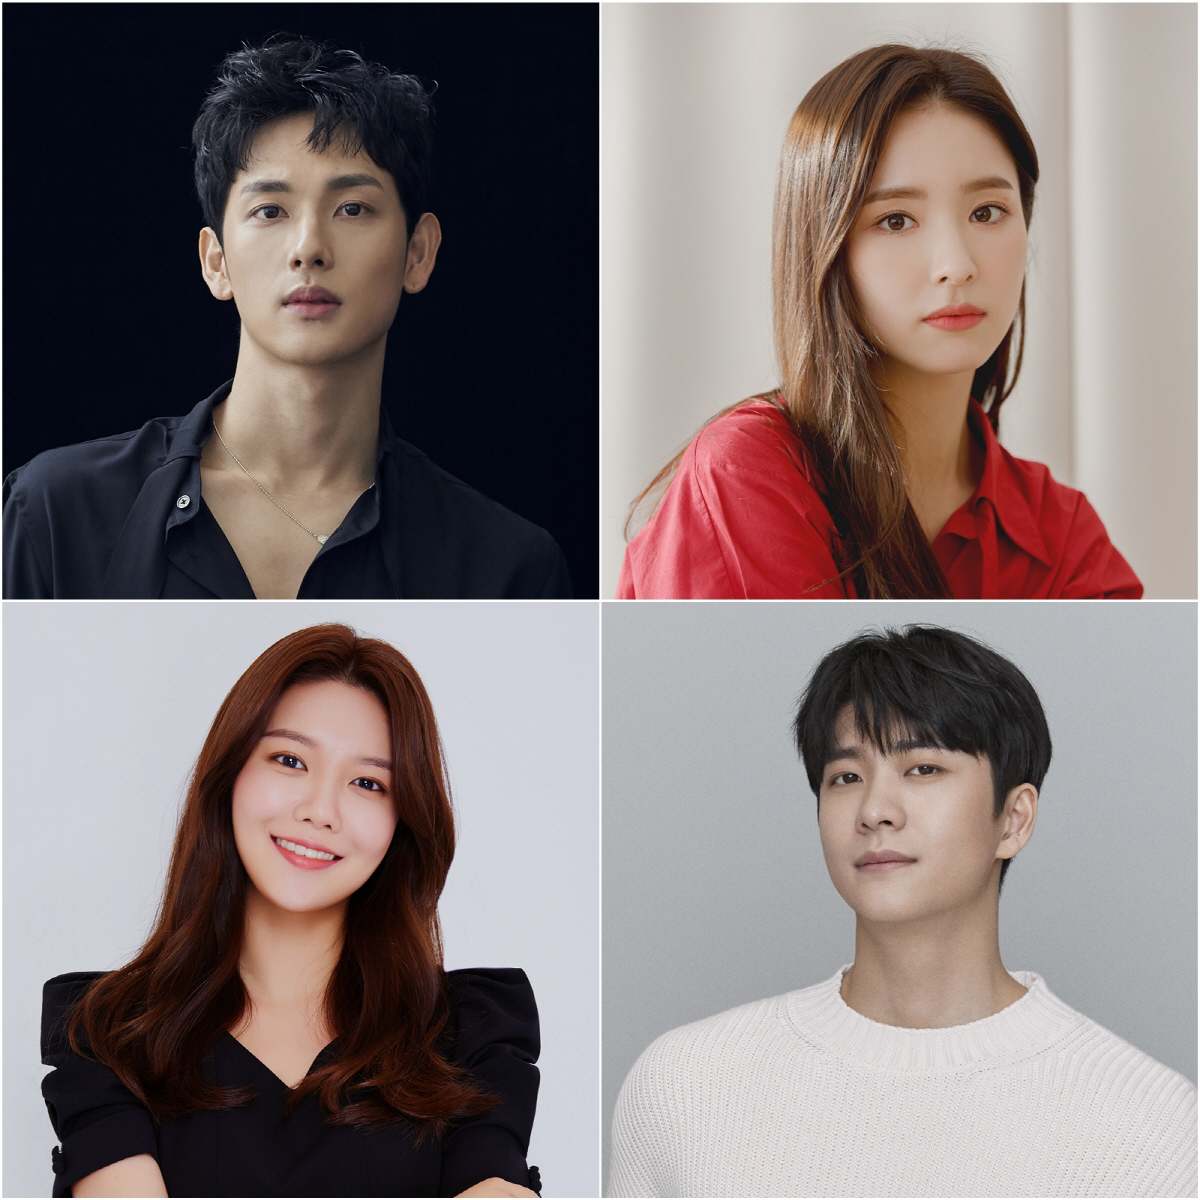 Actor Siwan, Shin Se-kyungChoi Soo Young and Kang Tae-oh confirmed their appearances on Run On.This has completed a limited-class romance combination that will run on toward love.JTBCs new drama Run-on (directed by Park Si-hyun), is a romance drama in which people who live in different worlds communicate and relate in their own language and run-on toward love in an era where communication is difficult while writing the same Korean.Lee Jae-hoon PD of the drama Kim Kwa-jang and Todays Detective and a new Park Si-hyun writer who threw the first mini-series coincided.First, Siwan and Shin Se-kyung are divided into a short-range national team James Kyson who is defeated at the moment of looking back and a translator Oh miju who has to rewind numerous times.James Kyson, who retired without hesitation after a life-changing incident, was a star of the athletics world who showed off ticket power in the unpopular athletics.Oh miju, who has been together since the moment he left the track, opens his eyes to other worlds that were not seen in Run World.Oh miju works to put a bridge between different languages.I was conscious of a foreign language that I would not have known if I had not had a subtitle because of the movie I saw at the first theater, and when the subtitles I was grateful for reached the level of intrusion, I became a translator without hesitation.For the first time, I find myself expecting James Kyson, a man who has come to fate as much as the thrill I felt when the credits subtitles - Oh miju climbed.Siwan, who had been playing a crazy acting role in the process of anxiety turning into madness through the drama Other is Hell last year, and Shin Se-kyung, who showed off the power of Loko Queen through New Entrepreneur,Both Actor are the first home theater comeback in more than a year: Siwan, who will be performing romance for a long time, and Shin Se-kyung, who will write a deep love language that is different from his previous work.Two men and women living in a world that seems to have no intersections are looking forward to seeing whether the language of love can succeed in translation.Choi Sooyoung and Kang Tae-oh are breathing with the sports agency representative Seo Dan-a and the beauty student Lee Young-hwa such as ion beverage.The West Dan, who was pushed from the succession order only because he was not a son, and is the only enemy of the signing group, so he wants to live perfectly to regain what was originally my own.In her life, which has been so intense, Lee Young-hwa comes in. Seo Dan-ah, who lived without knowing the apology, was the first man to be busy.Lee Young-hwa, who lives a life of a popular senior in art college with an oxygen-like charm, is a college student who likes the same movie and croquette as his name.It was everyday to go out to the streets with a sketchbook, or to Crookie while watching movies in his space. One day I met a strange woman, Seo Dan-ah, who asked me to draw a picture.I want to see a woman like Rapunzel who can not come down in that tall building.The combination Choi Soo Young, who has solidified his position as an actor by crossing TV and screen such as drama Tell as you see and movie Girl Cops, and Kang Tae-oh, who showed a strong presence to viewers through last years Chosun Roco - Mungdujeon, is also interesting.Because I have already played the characters of men and women living in a completely different world, so I wonder how they will meet and communicate in what language they will communicate in.This is why different romance chemistry is expected.The production company Mace and the content production that hit the box office with JTBC Itaewon Clath earlier this year co-produced Runon.The production crew said, The Runon will draw a story about the protagonists who lived in World, growing through each other, breaking the frame that they had, affecting each other, and loving each other.I hope that this will be a time to worry about the language and communication that conveys my heart. Hot actors who have both acting and presence such as Siwan, Shin Se-kyungChoi Soo Young, Kang Tae-oh will communicate with viewers in a different romance in the second half of this year.I ask for your expectations and interest. Run-on will be aired on JTBC in the second half of this year.